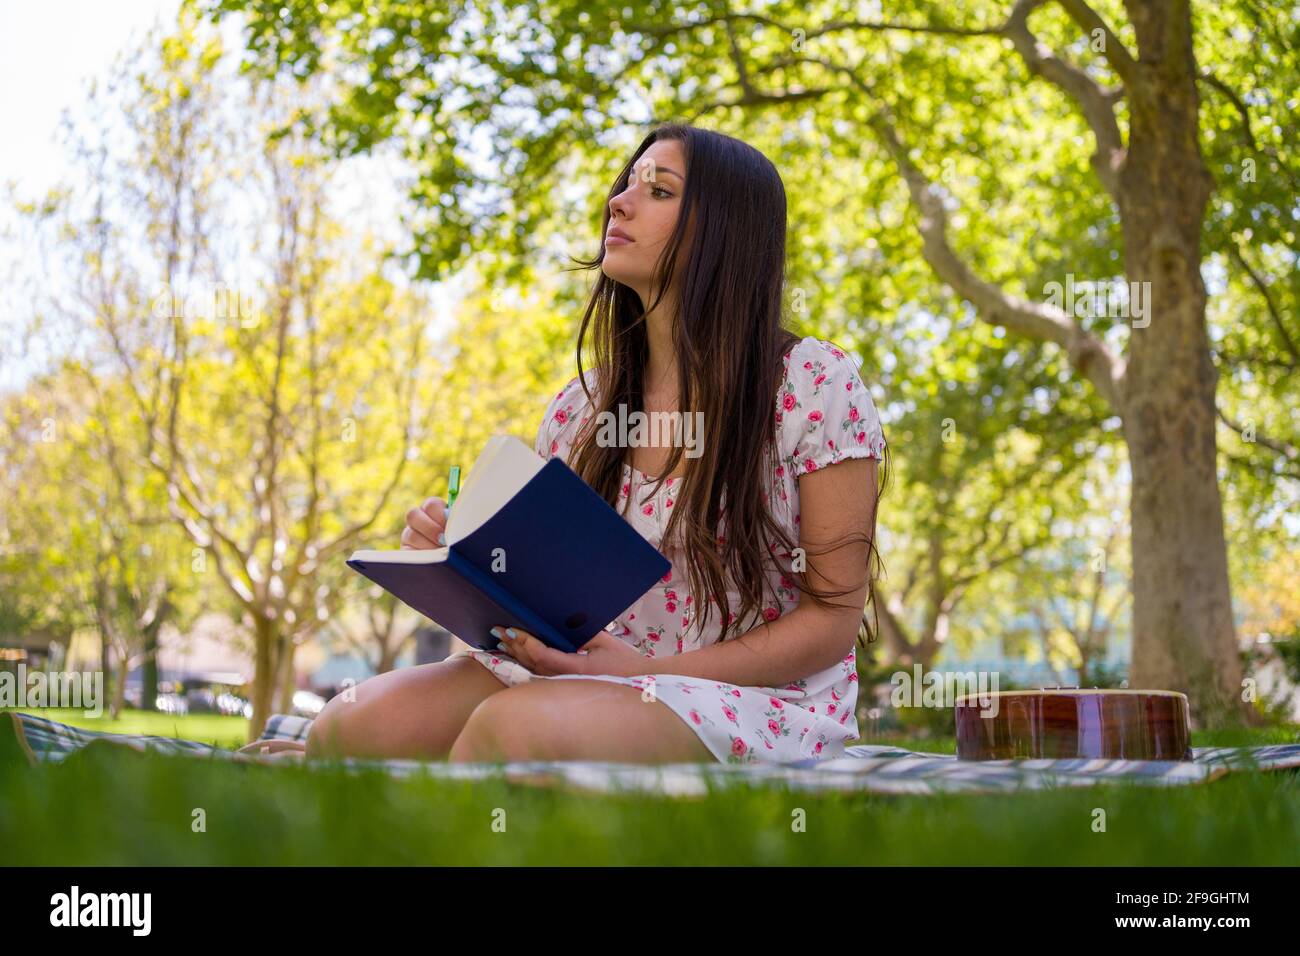 Beautiful Latina Teen Songwriter in the Park in lite springtime dress Stock Photo